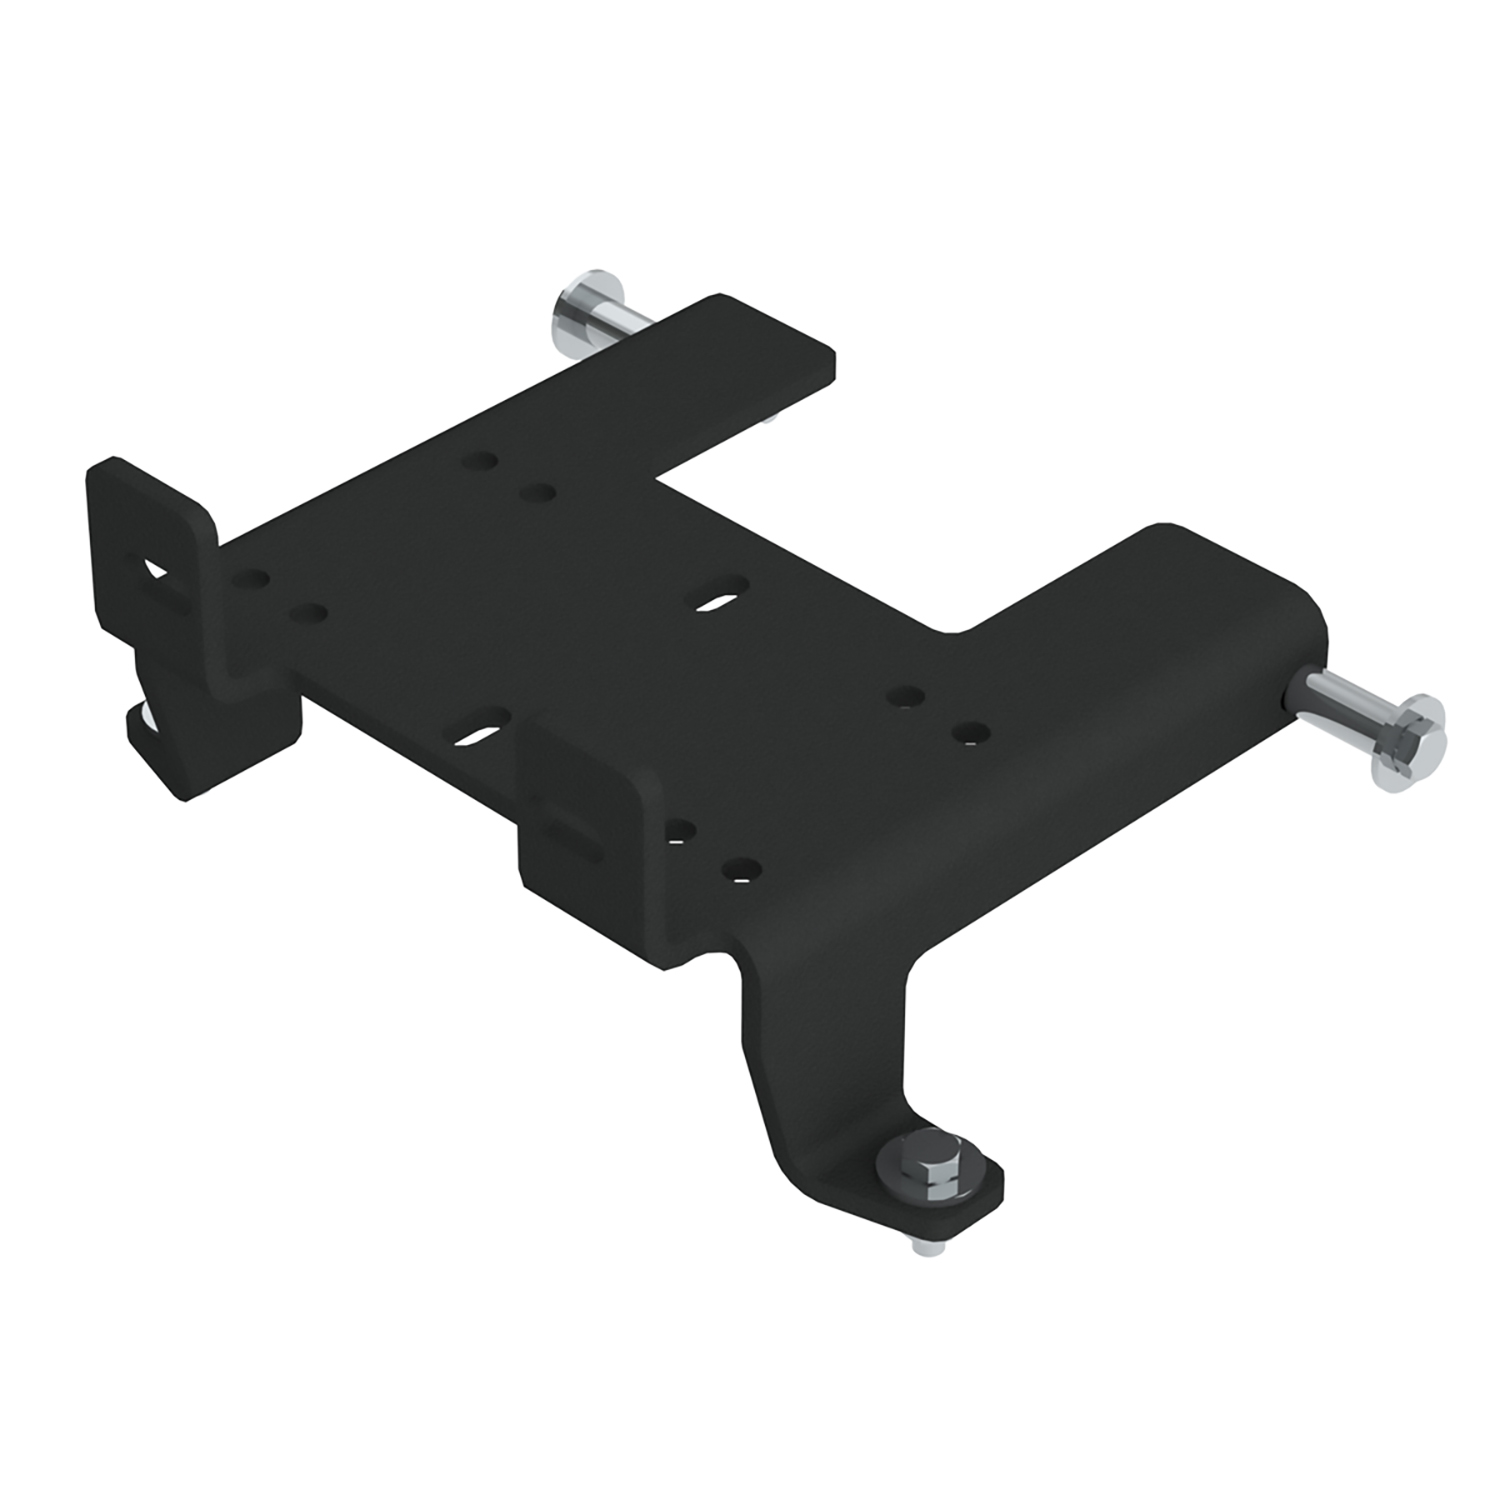 SwitZer Winch Mounting Plate For Winchs Up To 13500LB ATV Accessory WMP01 Black 